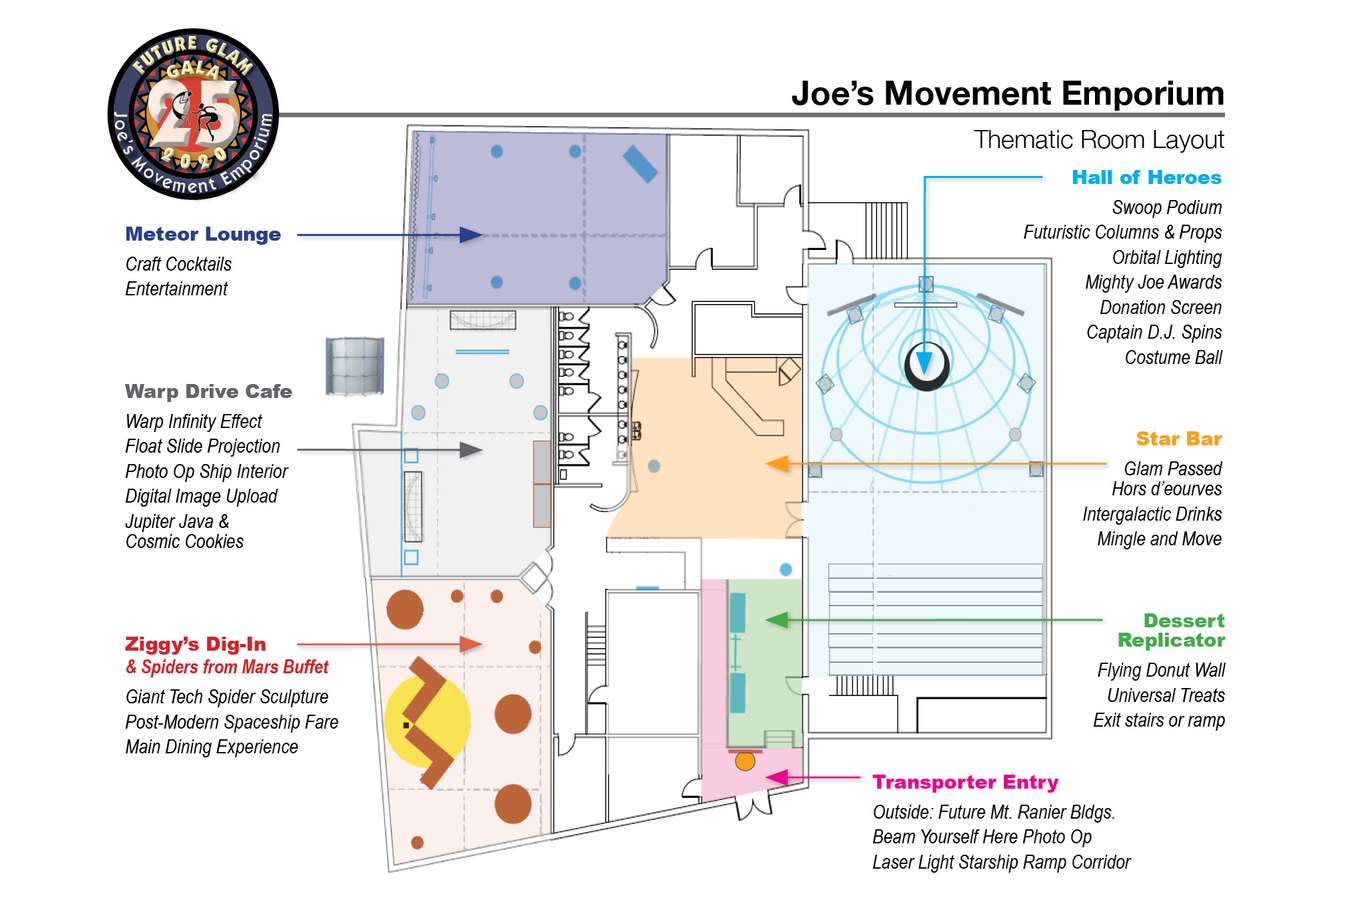 2D J-Glam Floorplan : Each studio area at Joe's Emporium was themed and stylized to convert the interior building space into a starship.